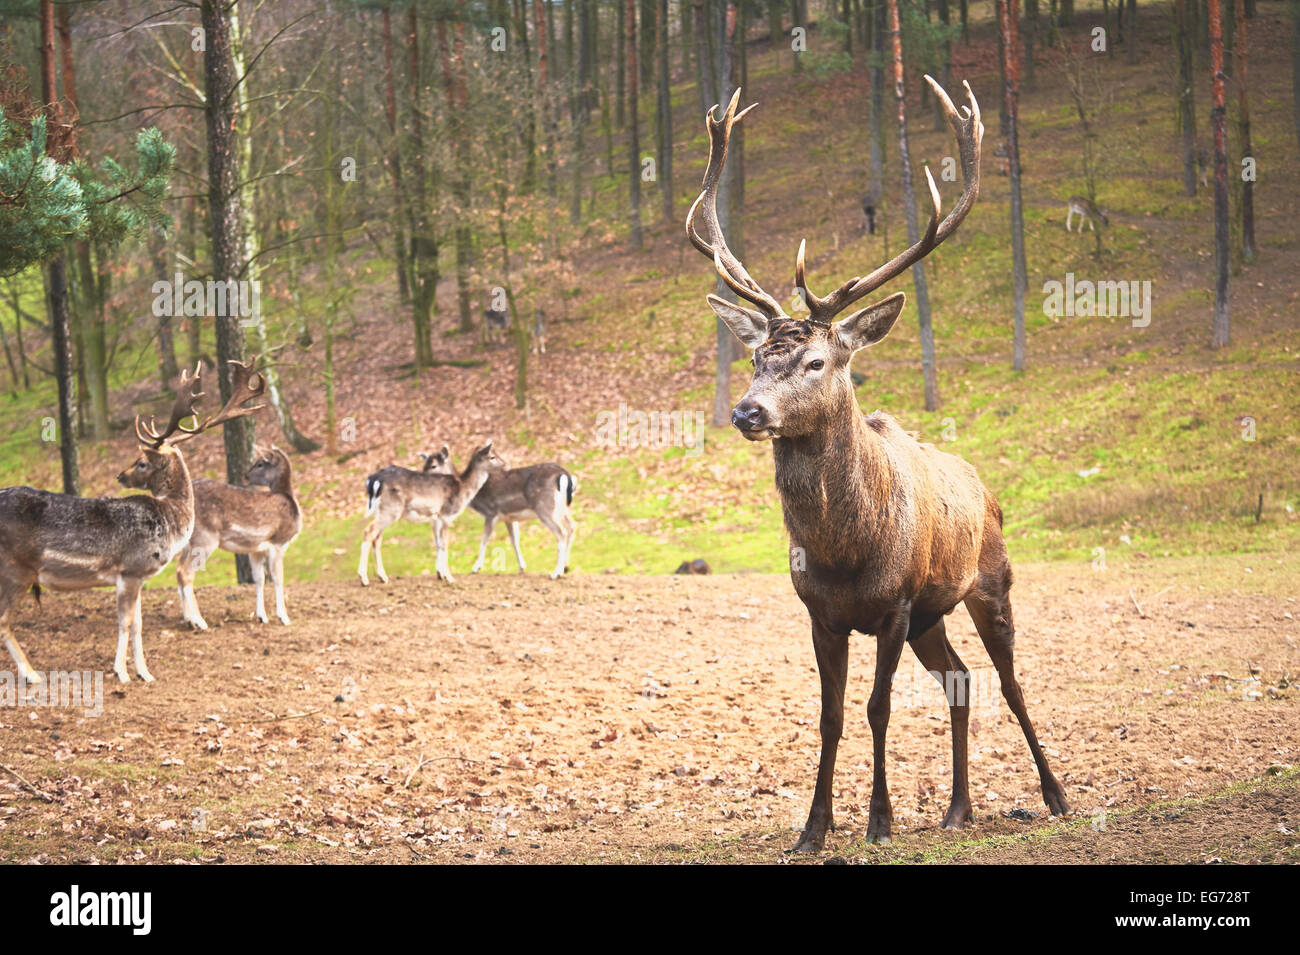 Powerful adult red deer stag in natural environment autumn fall forest. Stock Photo